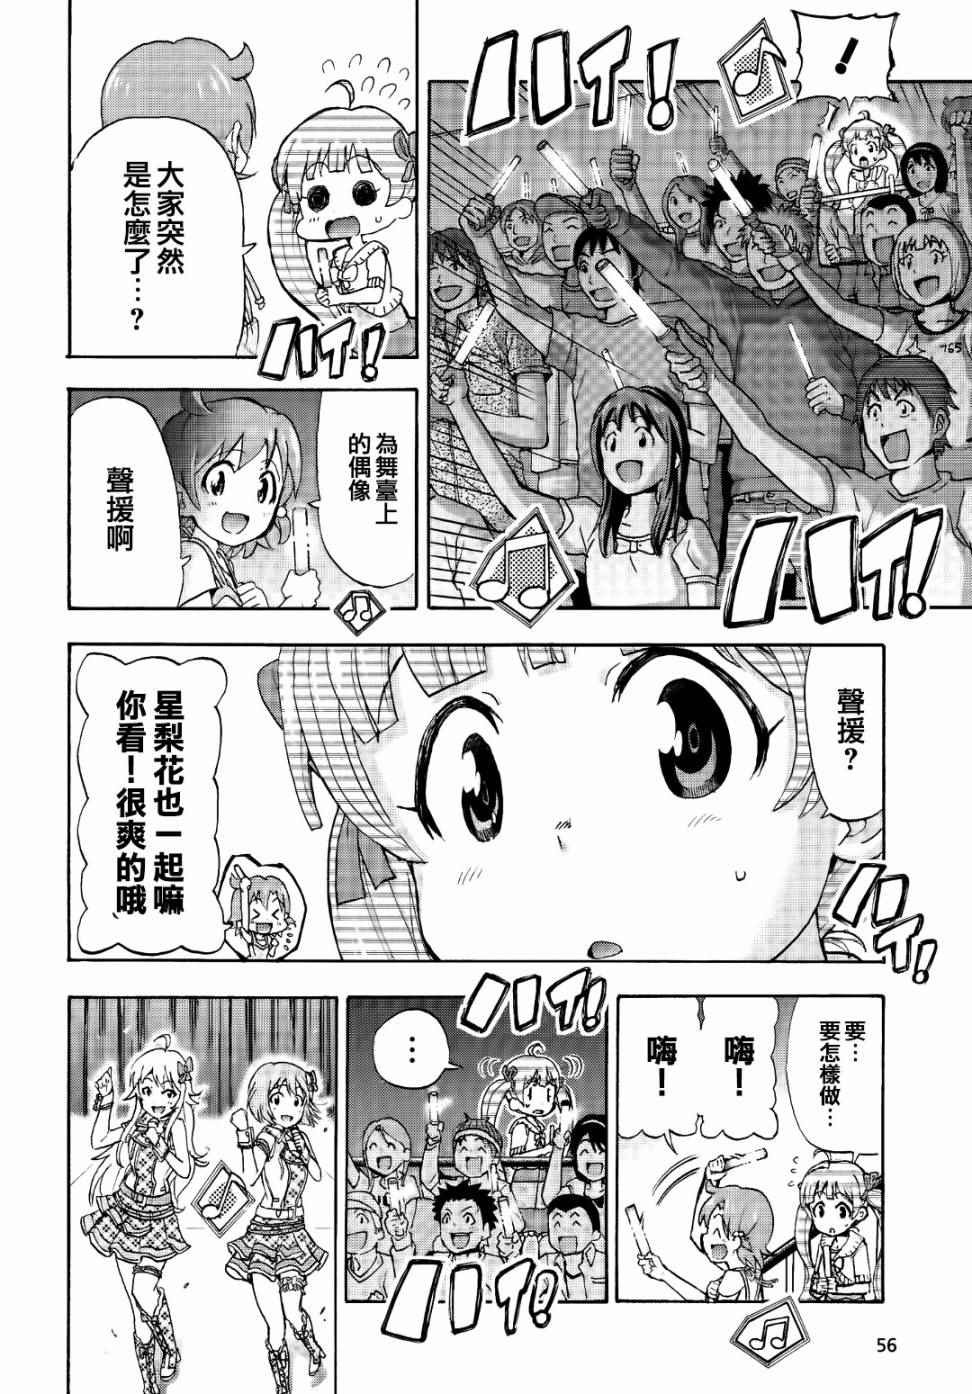 《THE IDOLM@STER MILLION LIVE! Blooming Clover》漫画 Blooming Clover 003话